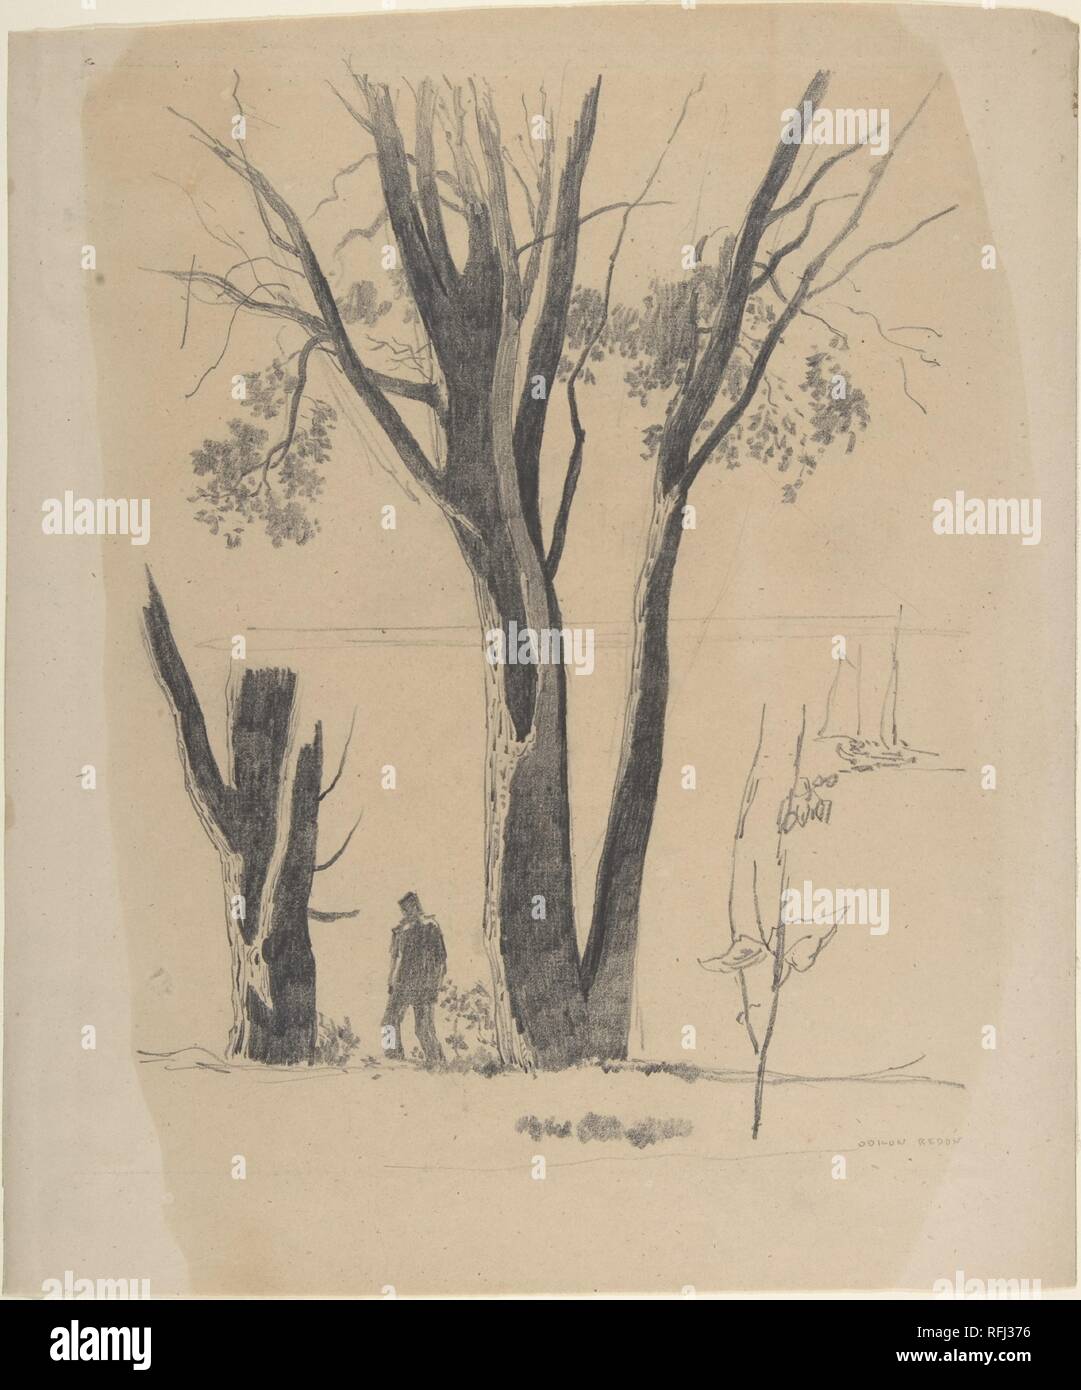 Study of Man between Trees. Artist: Odilon Redon (French, Bordeaux 1840-1916 Paris). Dimensions: 9 3/4 x 7 1/2 in. (24.8 x 19.1 cm). Date: 1860-1880.  This spare portrayal of a V-shaped tree finds formal echoes across the composition, from the stump at left to the spindly plant in the foreground. The retreating, isolated figure bracketed by the central tree and hollowed-out stump lends an air of melancholy to the drawing. Trees were a constant and significant motif for the Symbolist artist and one especially associated with the region of his childhood, Médoc, in the southwest of France. With t Stock Photo